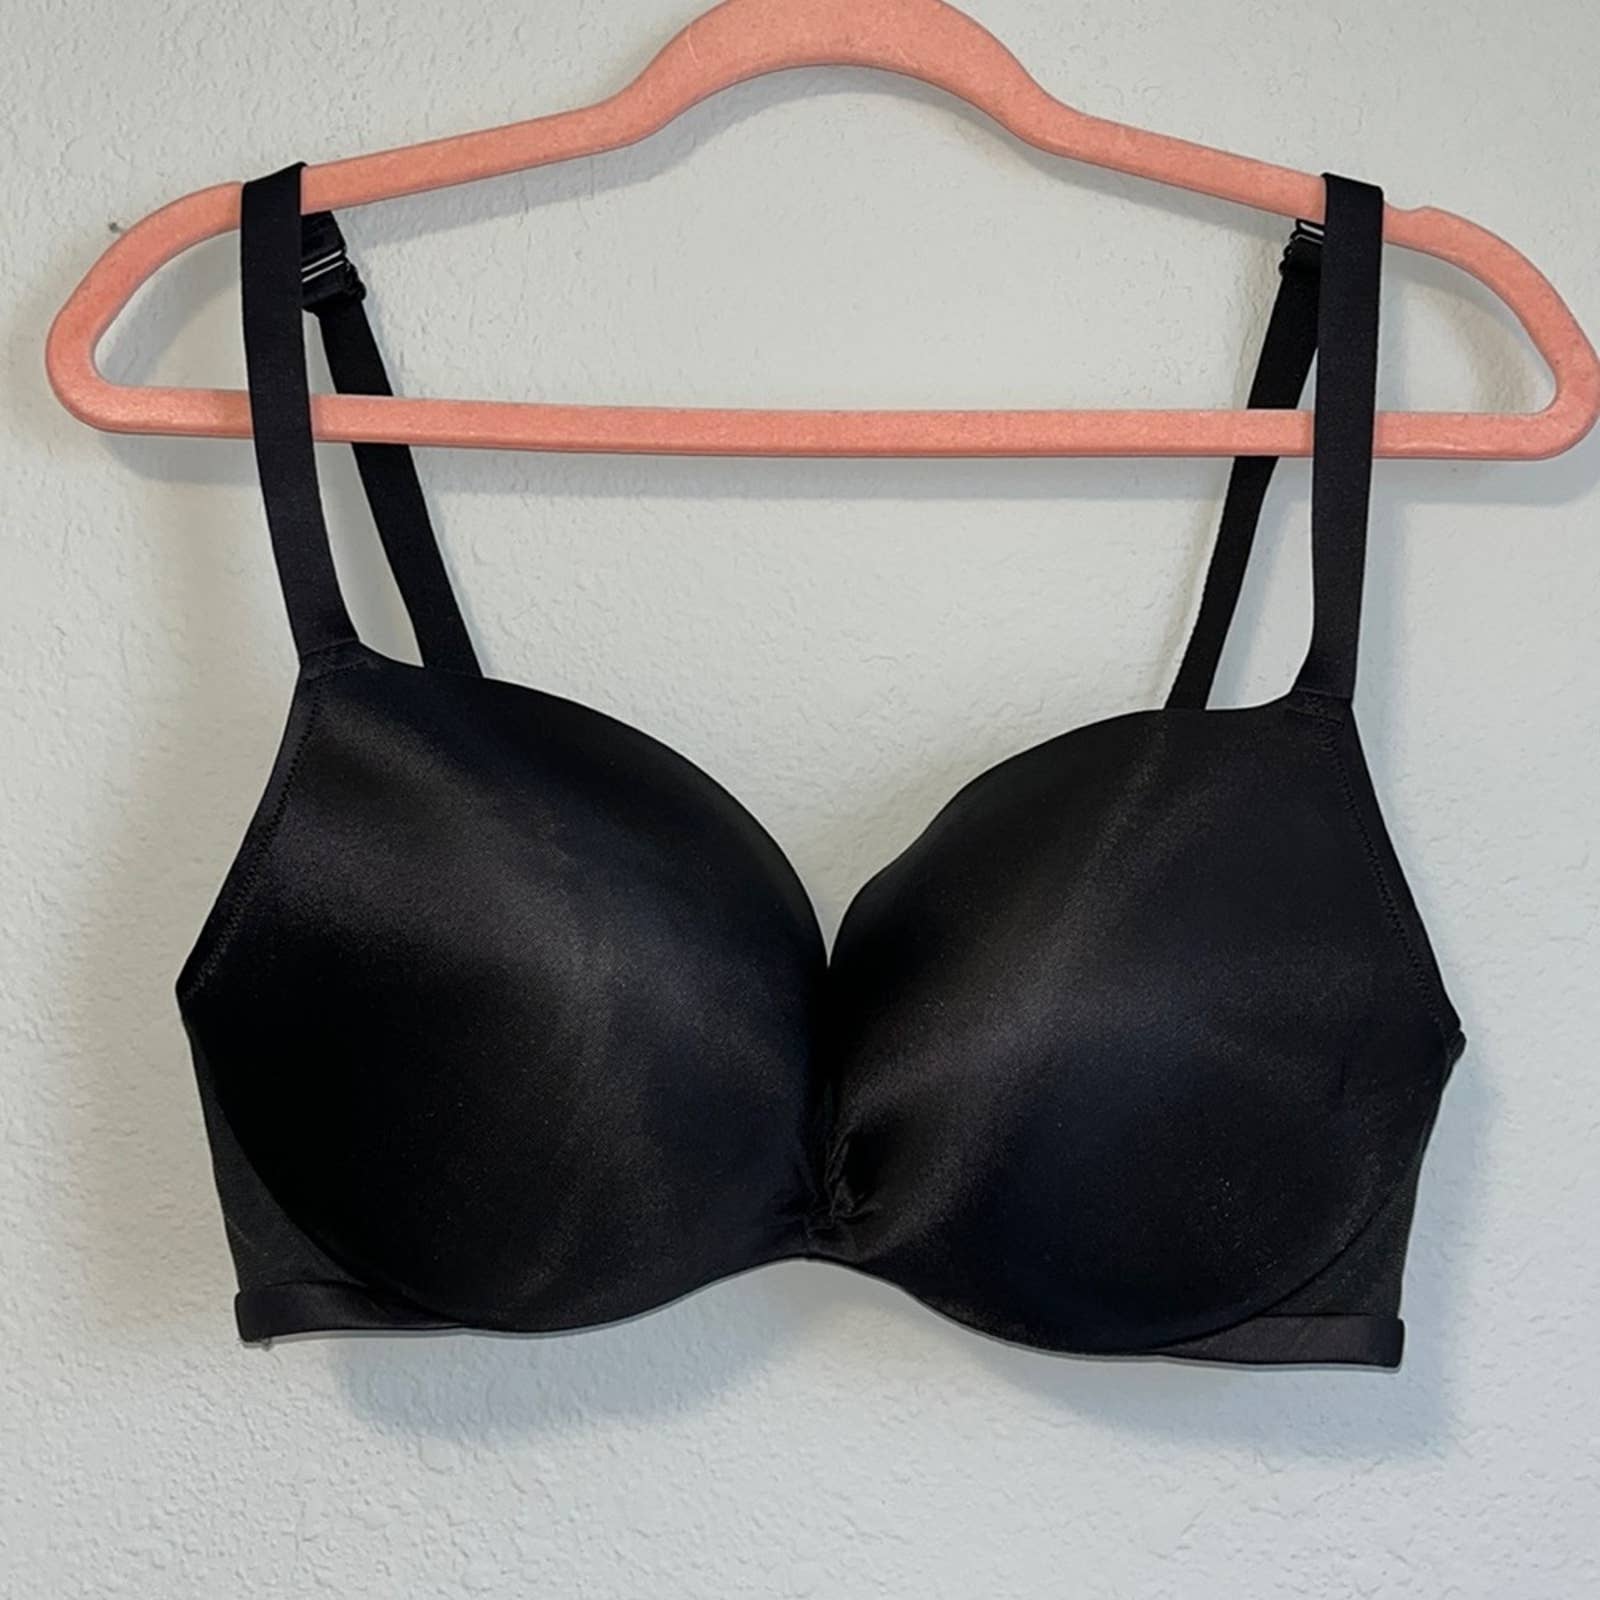 Cacique Black Lace Underwired Bra 46C Size 46 C - $12 (76% Off Retail) -  From Ashley